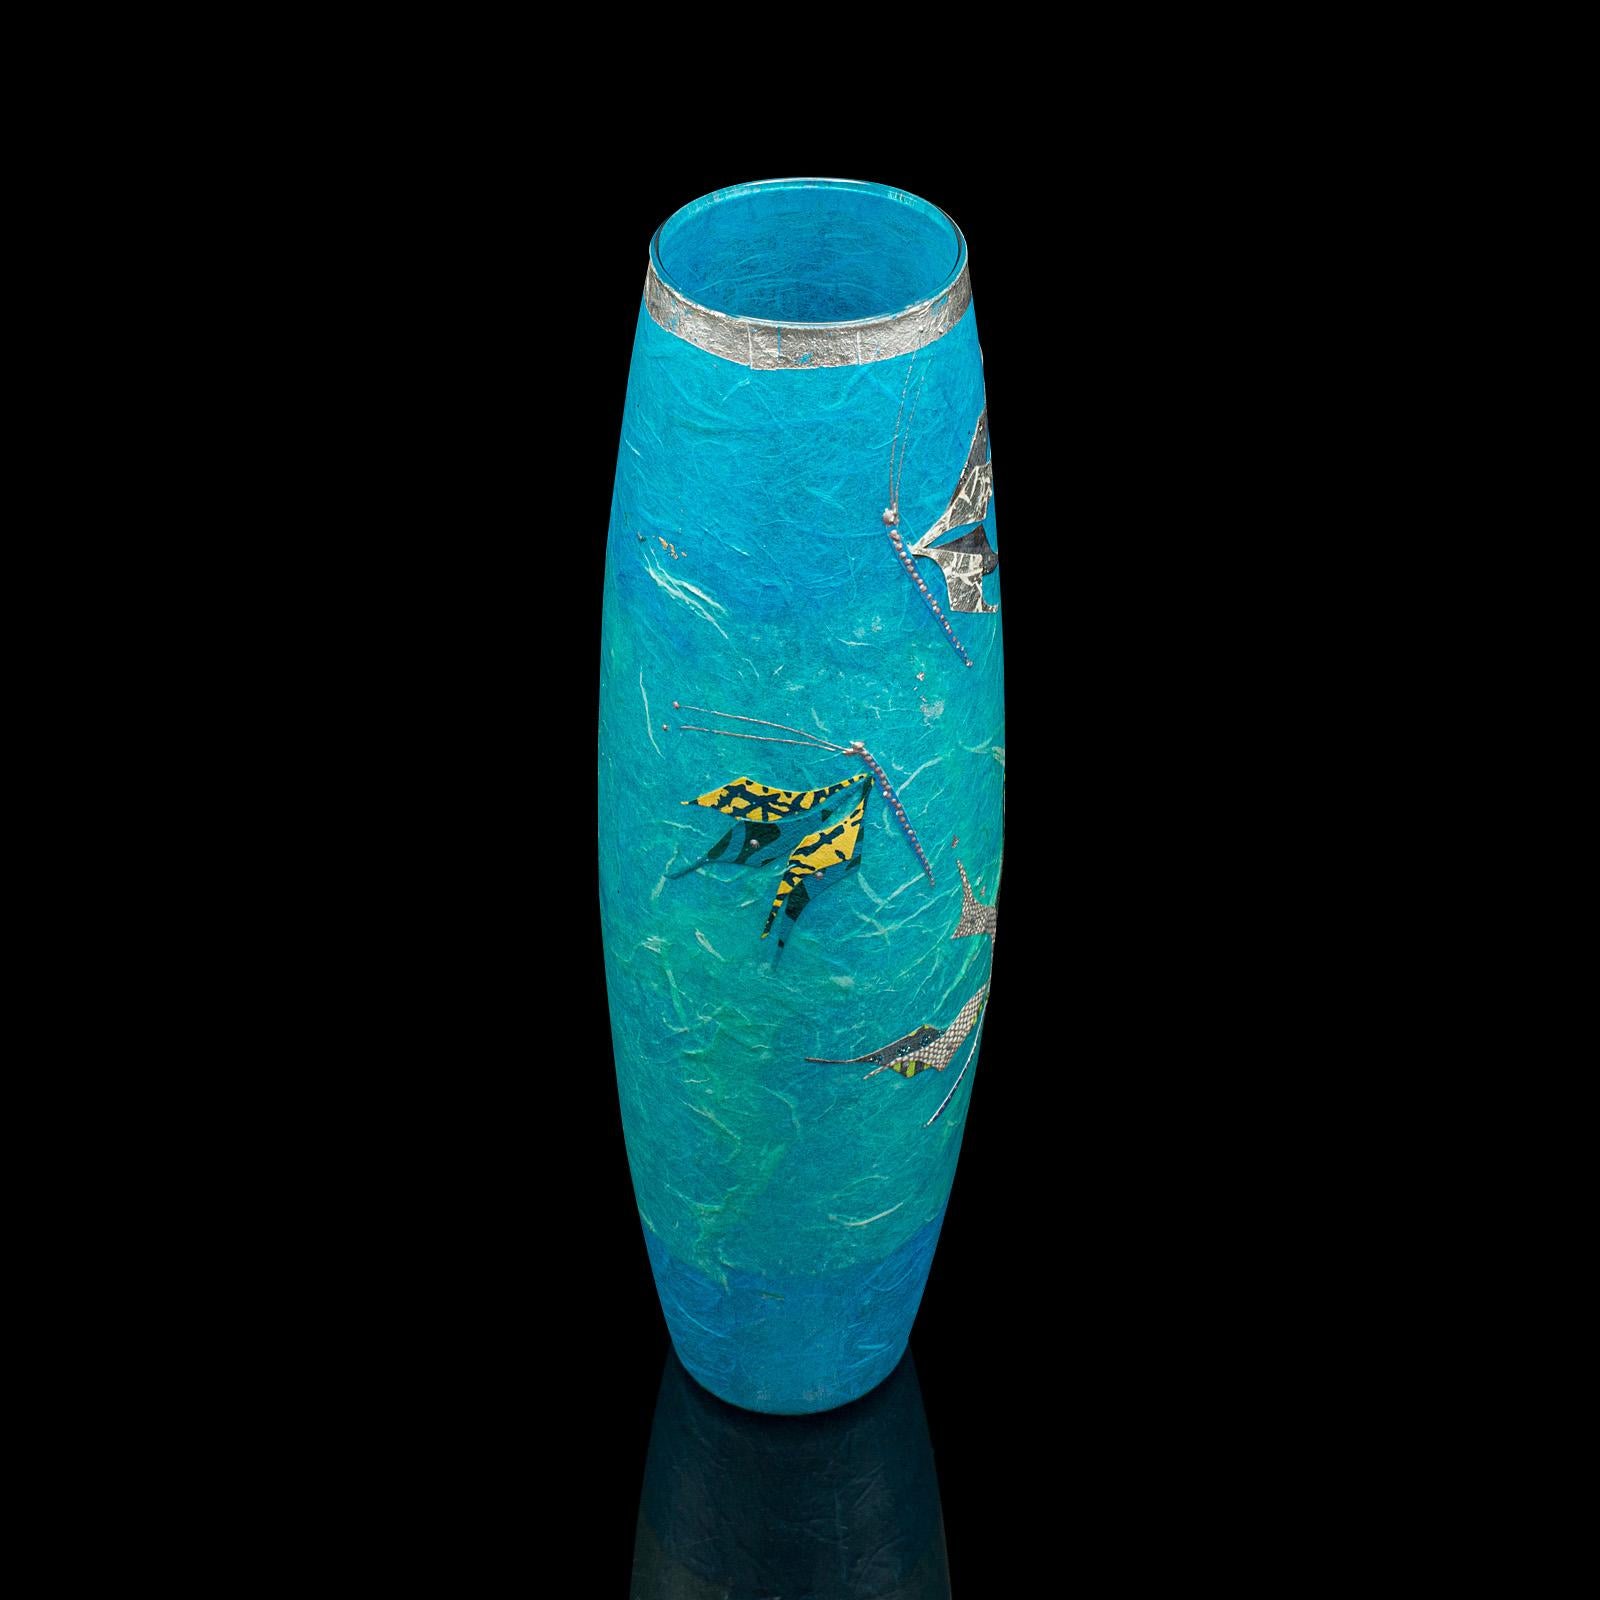 Tall Contemporary Decorative Flower Sleeve, English, Art Glass, Straw Silk Vase For Sale 1